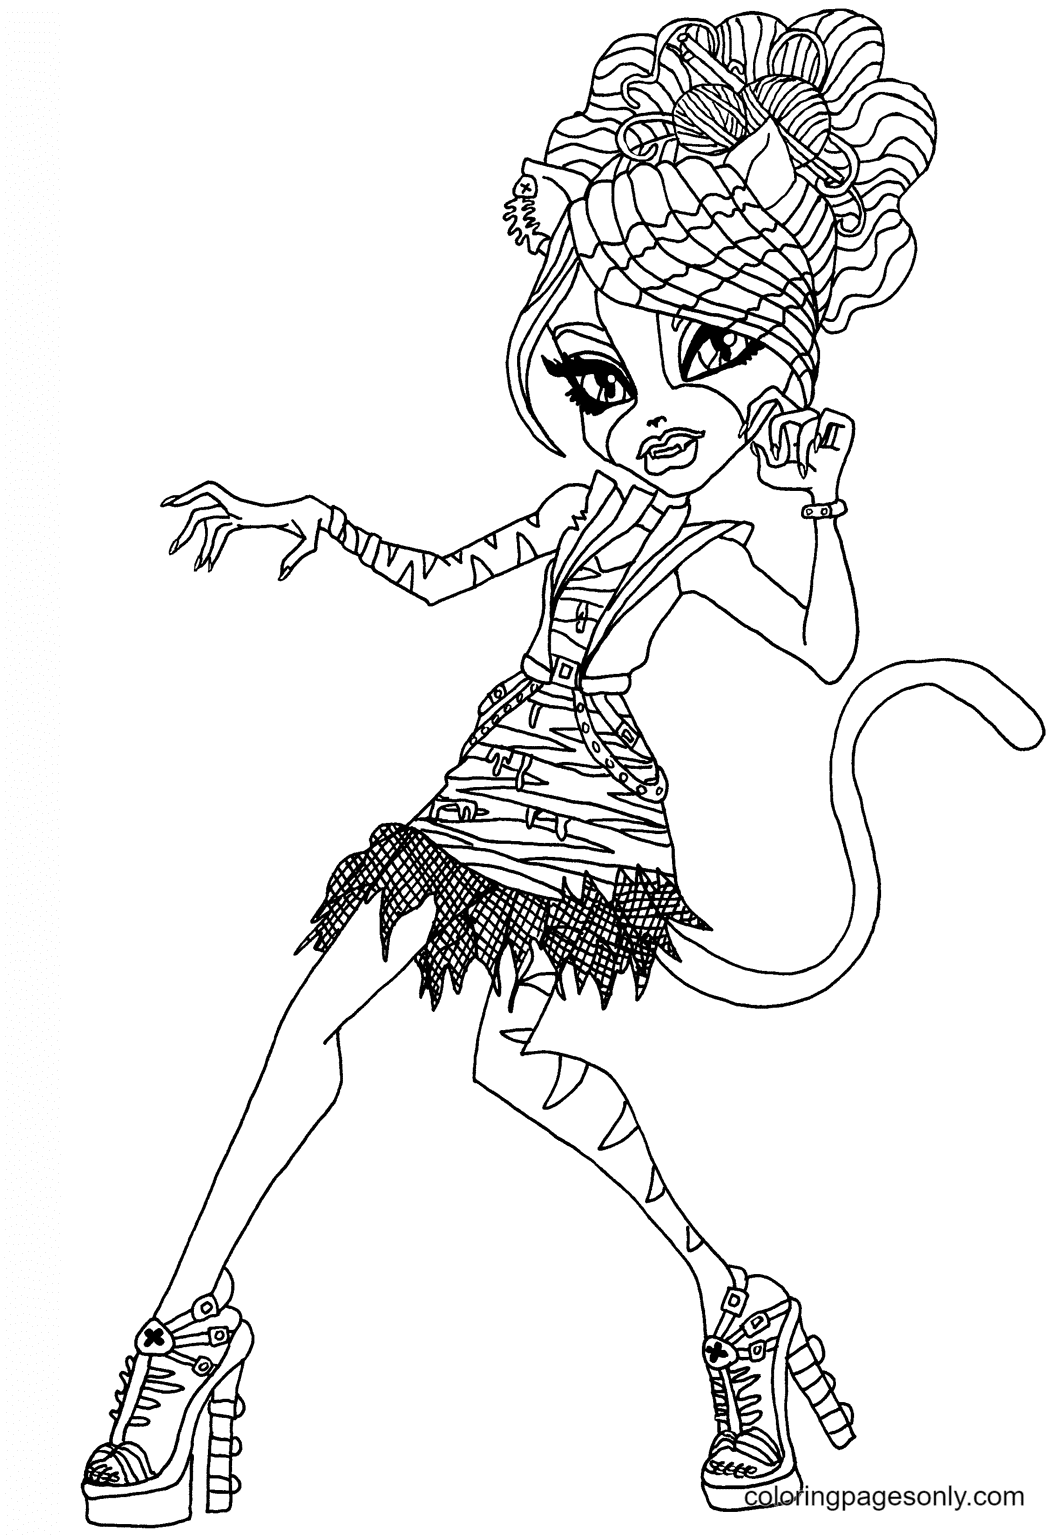 Meowlody Zombie Shake Coloring Page